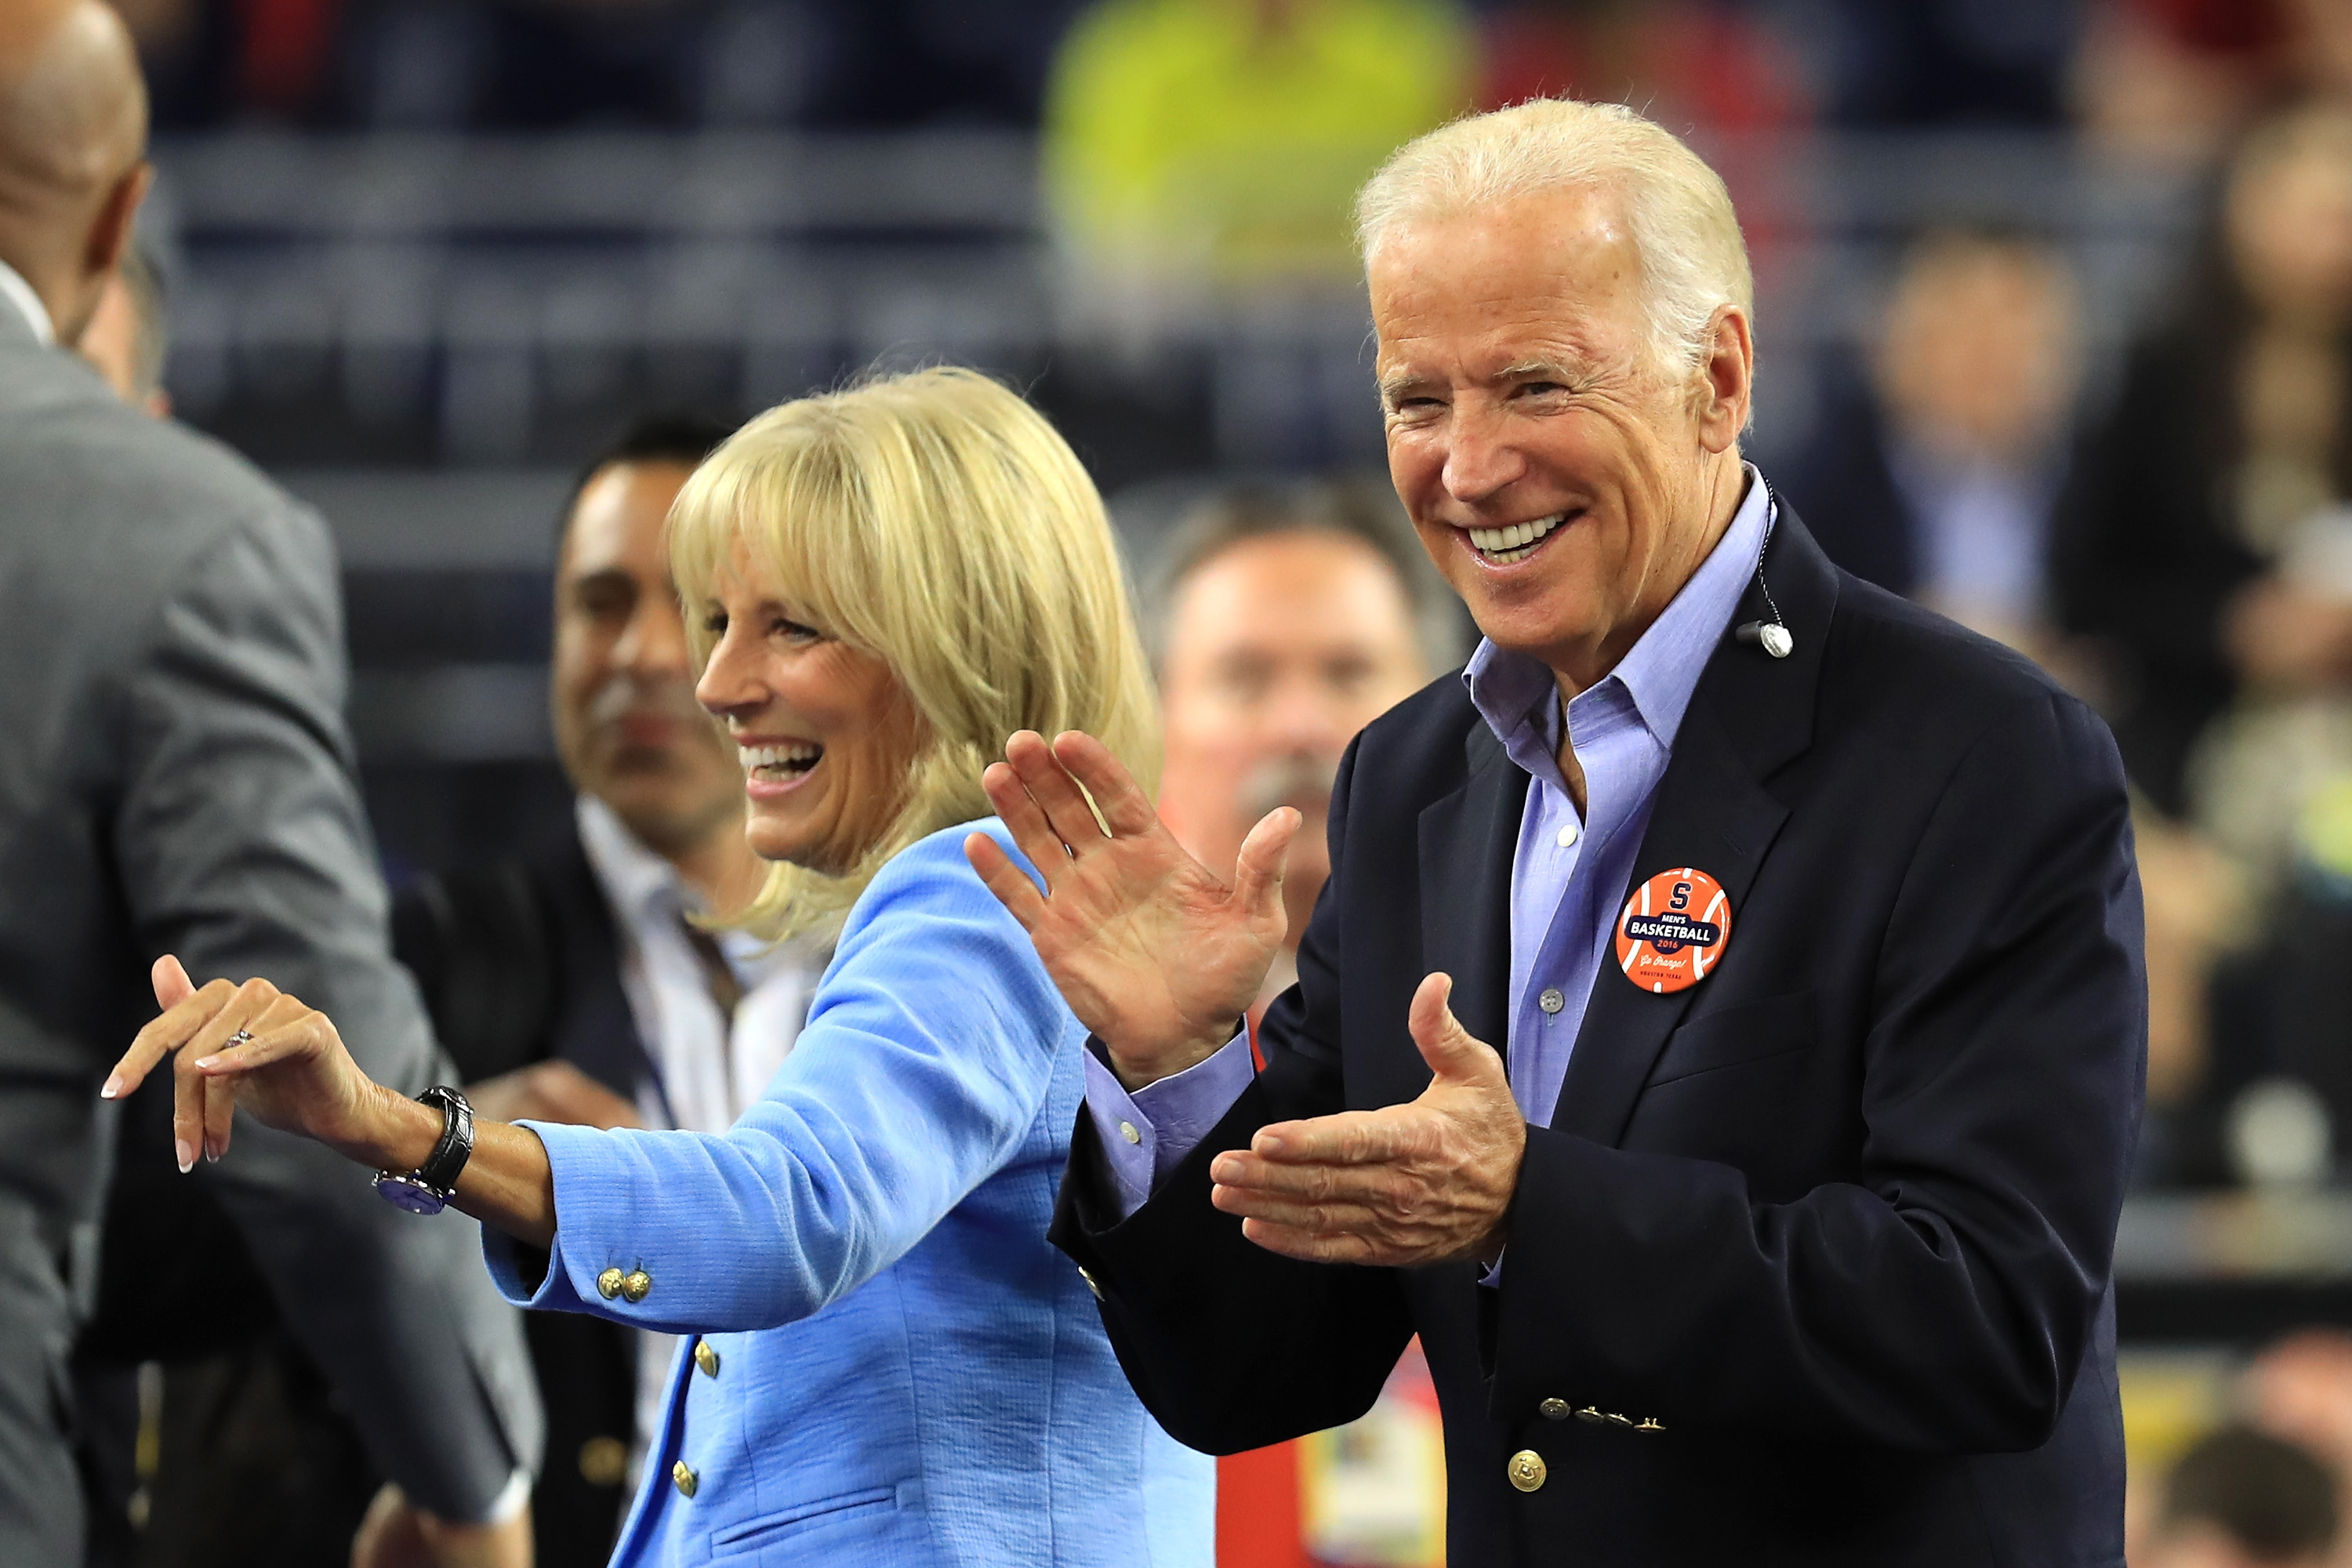 Vice President Joe Biden, right, and wife Jill Biden react prior to the NCAA Men's Final Four Semifinal between the Villanova Wildcats and the Oklahoma Sooners at NRG Stadium on April 2, 2016 in Houston, Texas.  Streeter Lecka&mdash;Getty Images (Streeter Lecka&mdash;Getty Images)